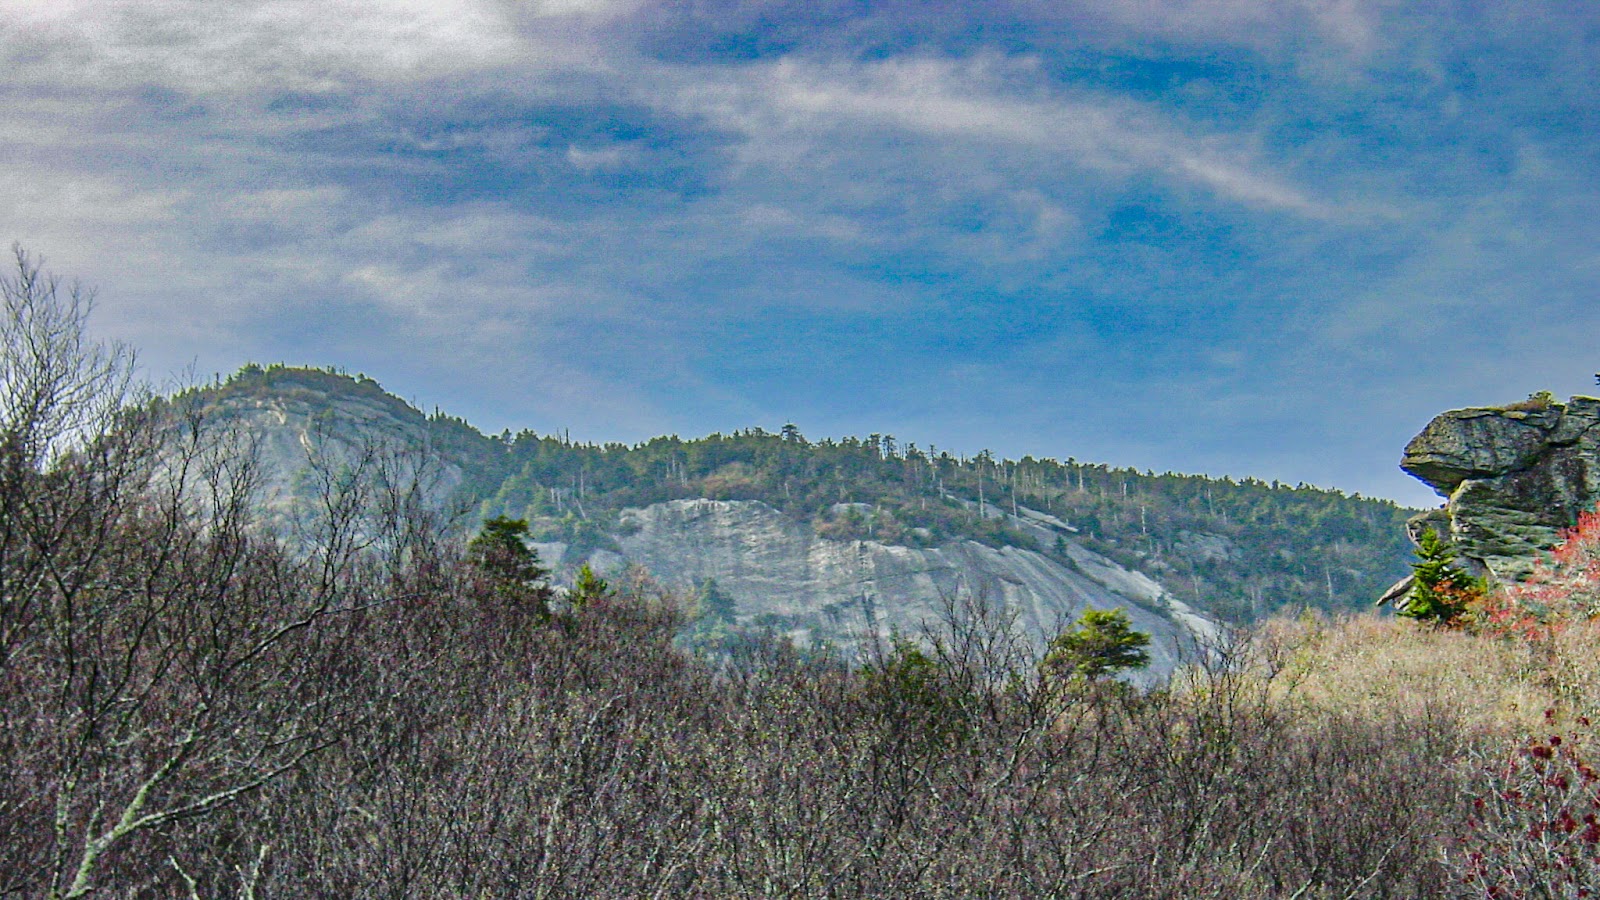 Exposed rocks against the cloudy blue sky with barren foliage in the foreground. A rock formation is on the right mid-ground. 